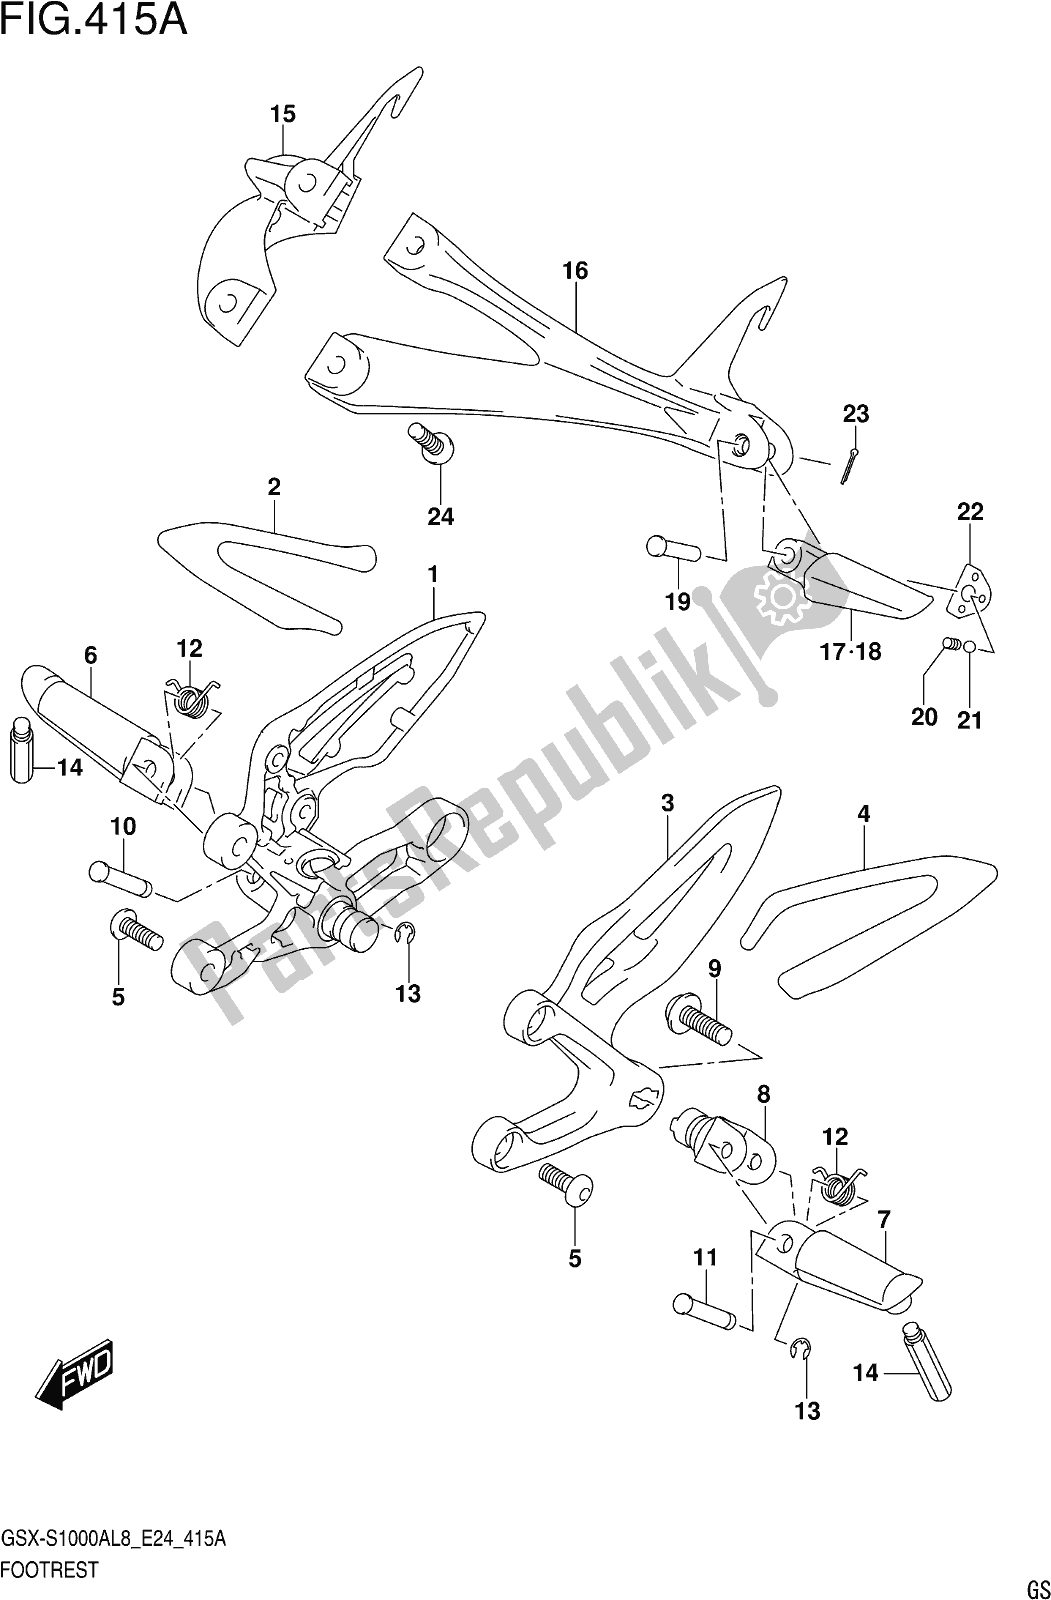 All parts for the Fig. 415a Footrest of the Suzuki Gsx-s 1000 AZ 2018